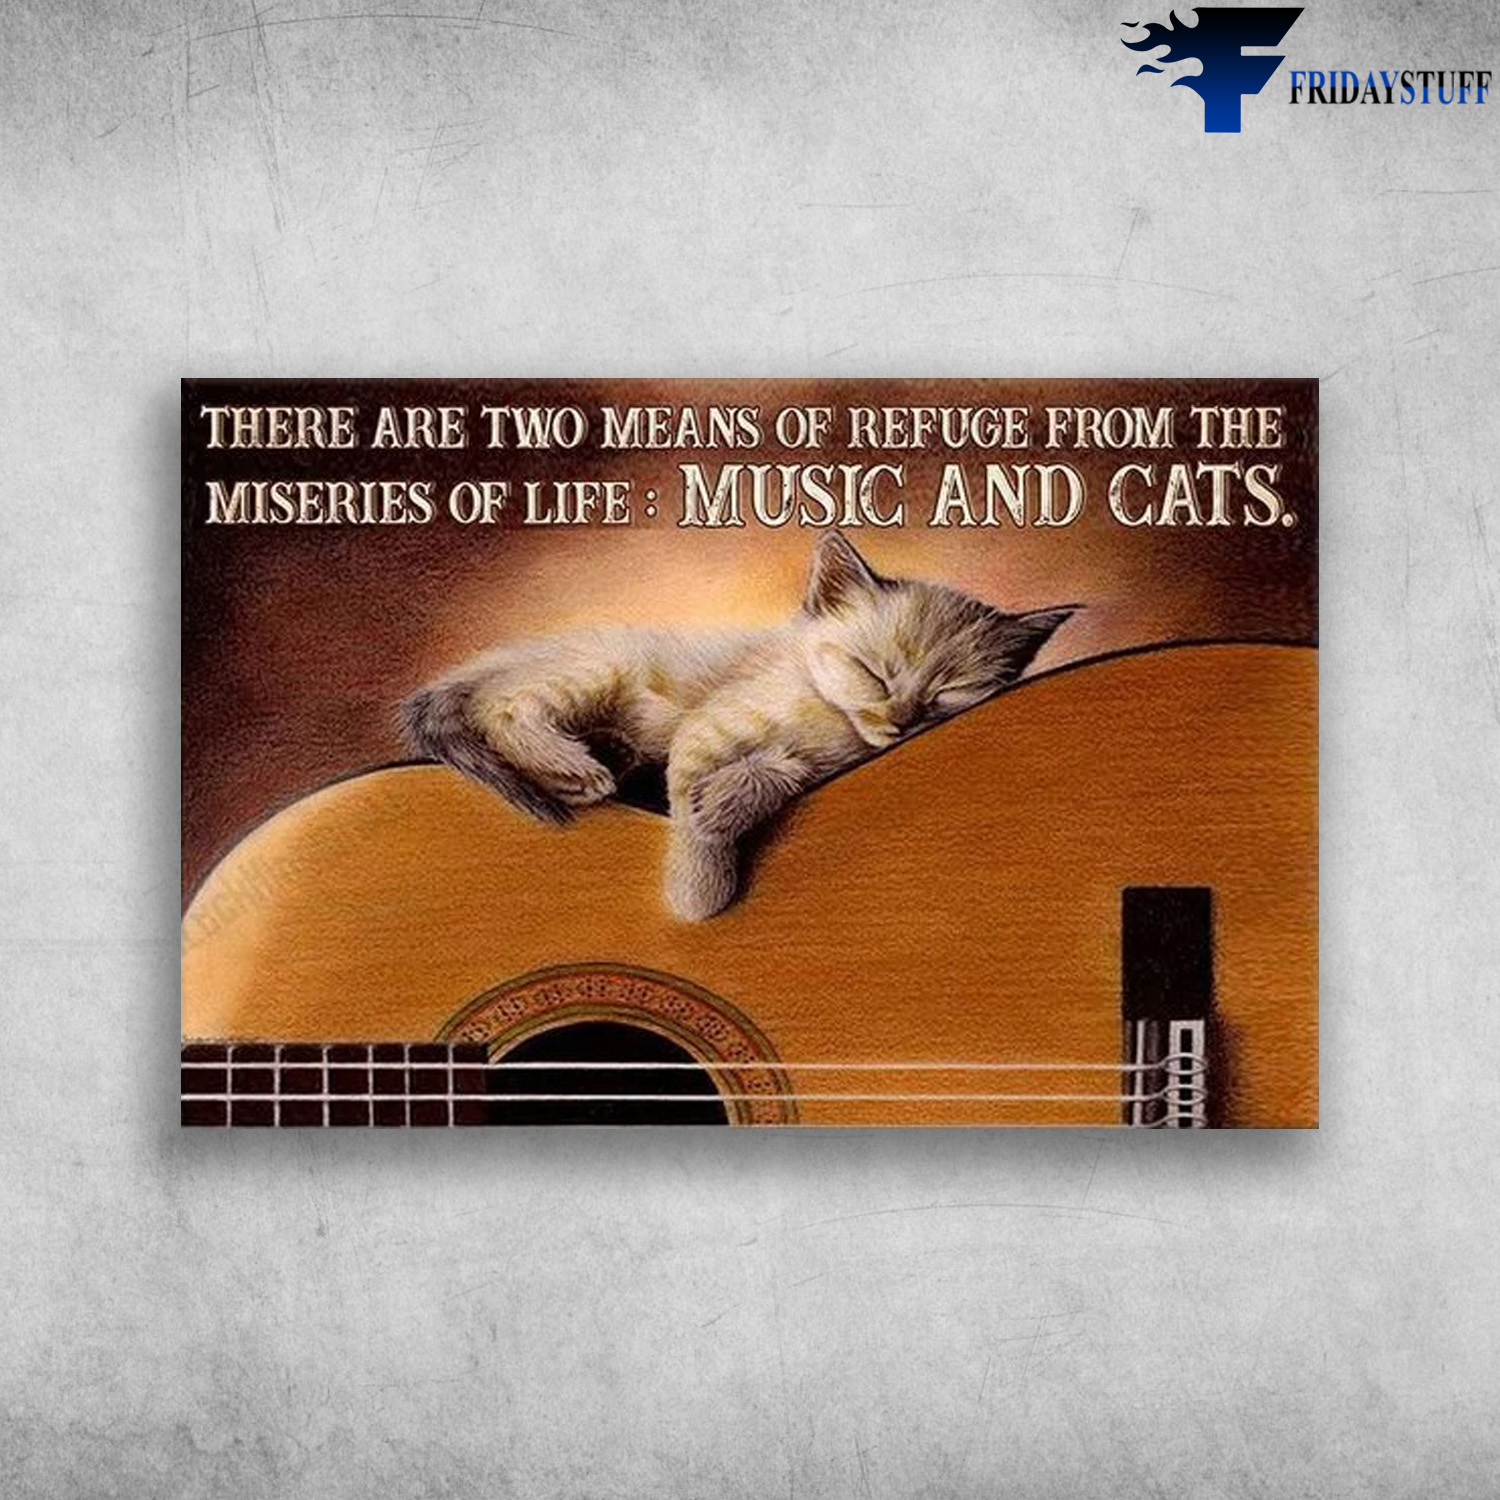 Cute Cat On The Guitar - There Are Two Means Of Refuge From The Miseries Of Life, Music And Cats